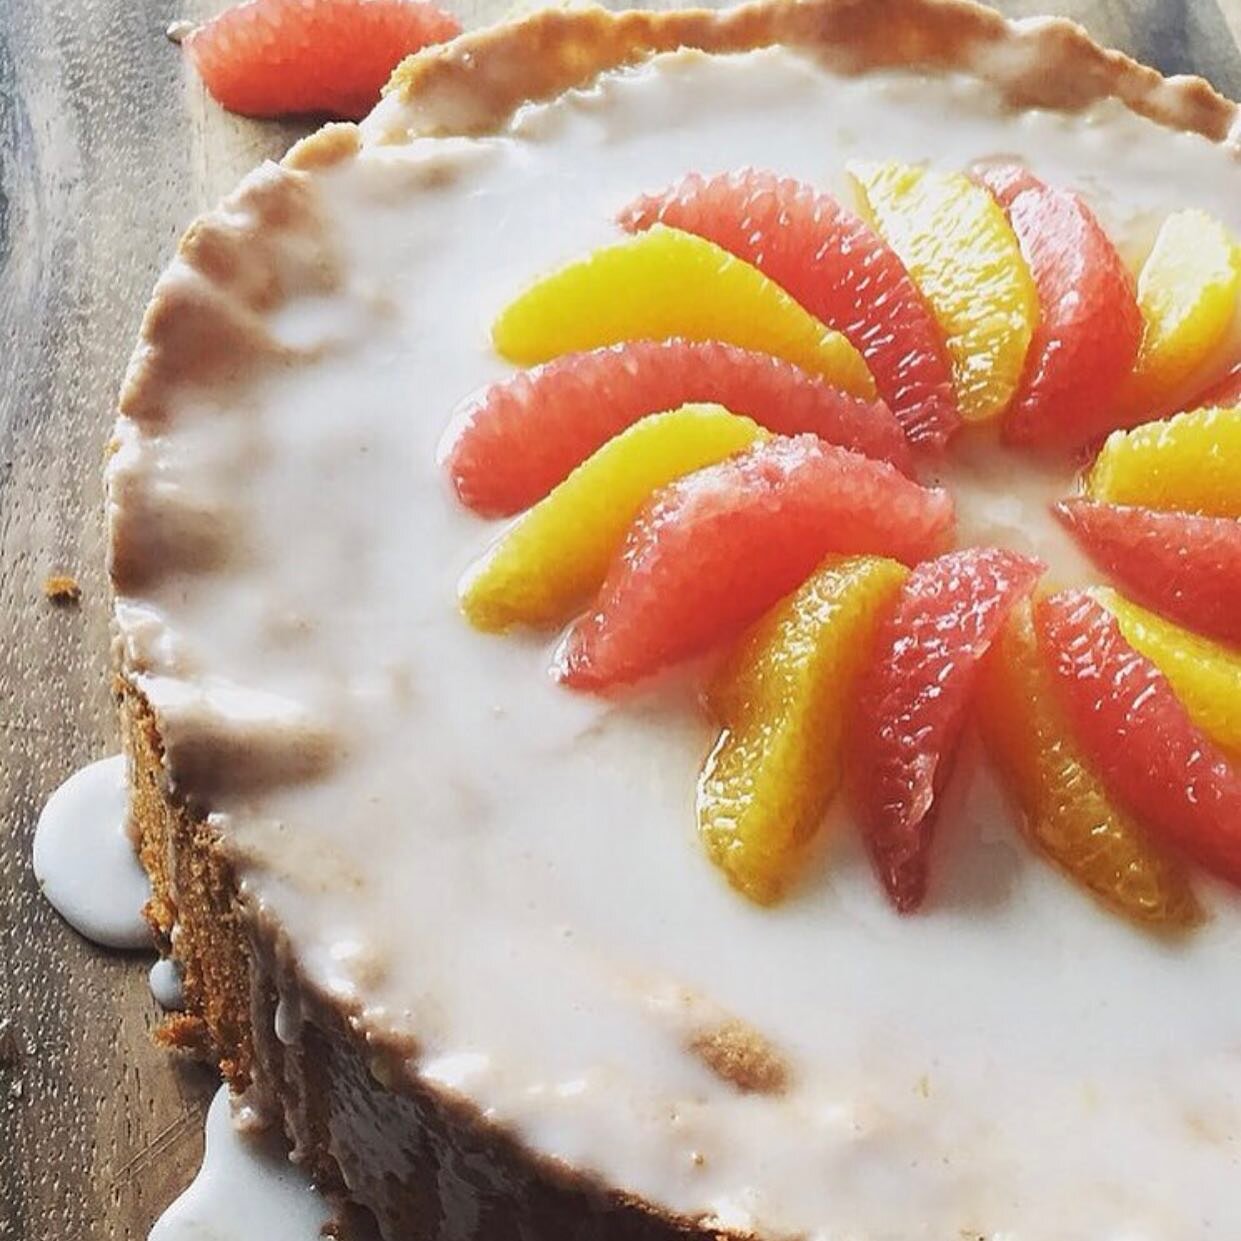 It&rsquo;s citrus season! Grab some beautiful, flavorful oranges and grapefruit from our produce department and make this amazing cake! 
_
CITRUS OLIVE OIL CAKE
serves 8
_
1 large grapefruit
1 large orange or sumo tangerine 
1 cup cake flour
5 large 